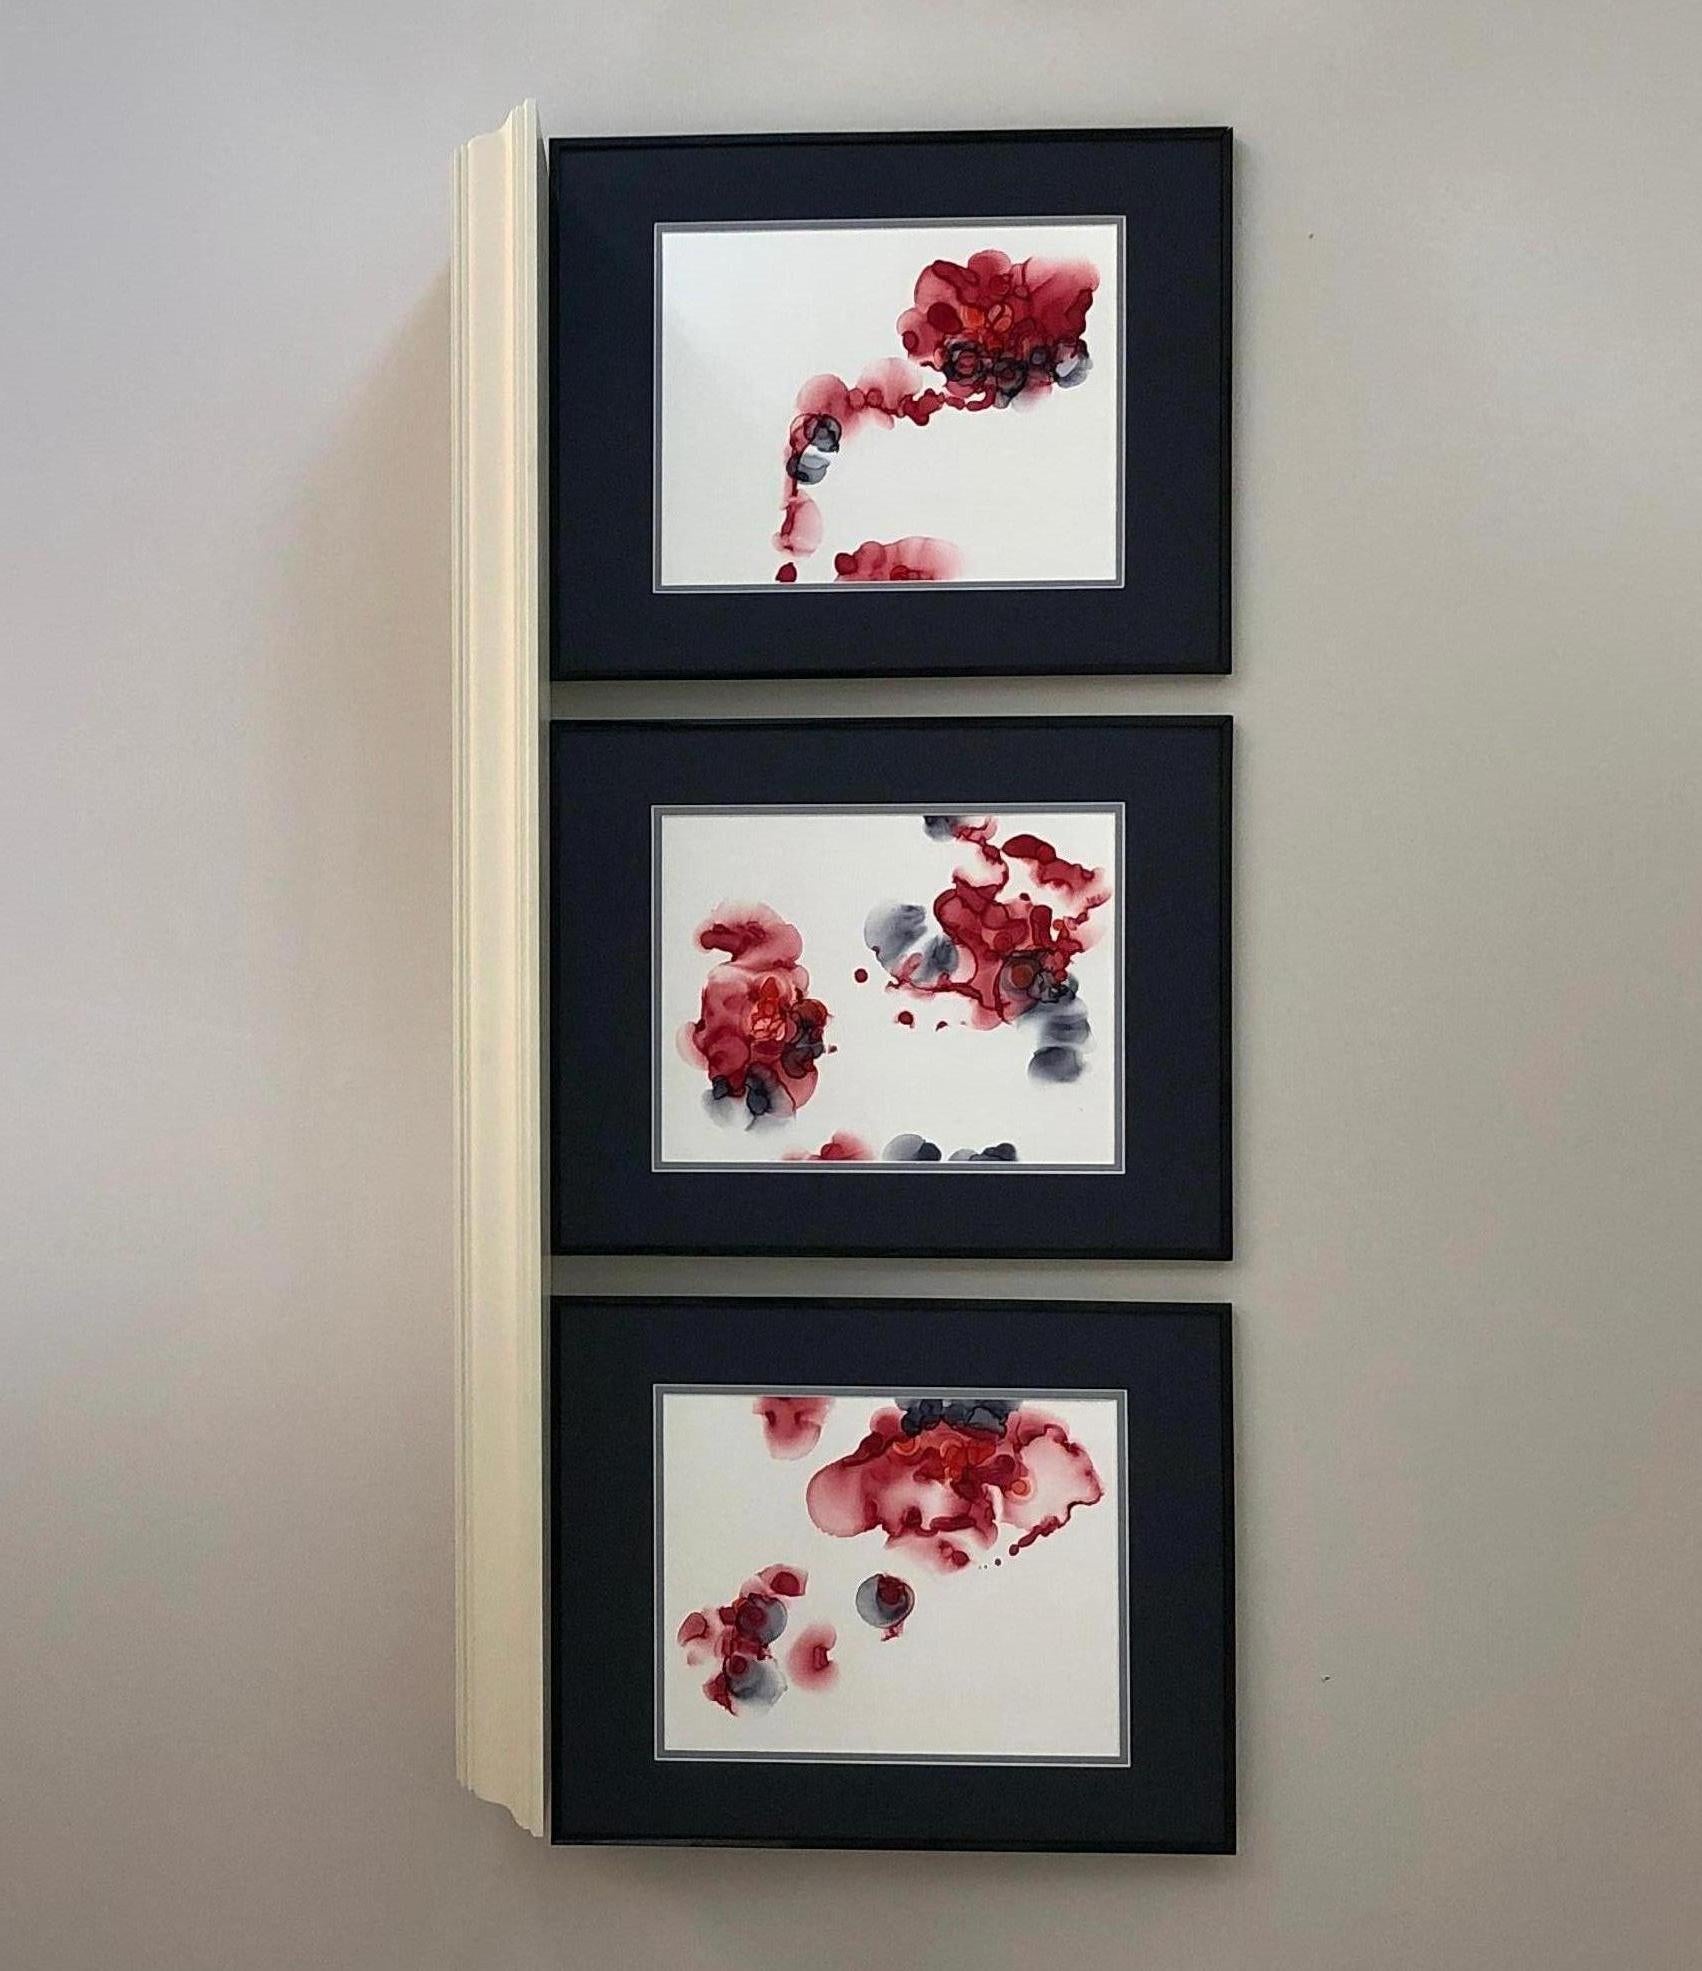 Singed roses - abstraction art, made in cherry red, garnet red, white, grey - Abstract Expressionist Art by Mila Akopova